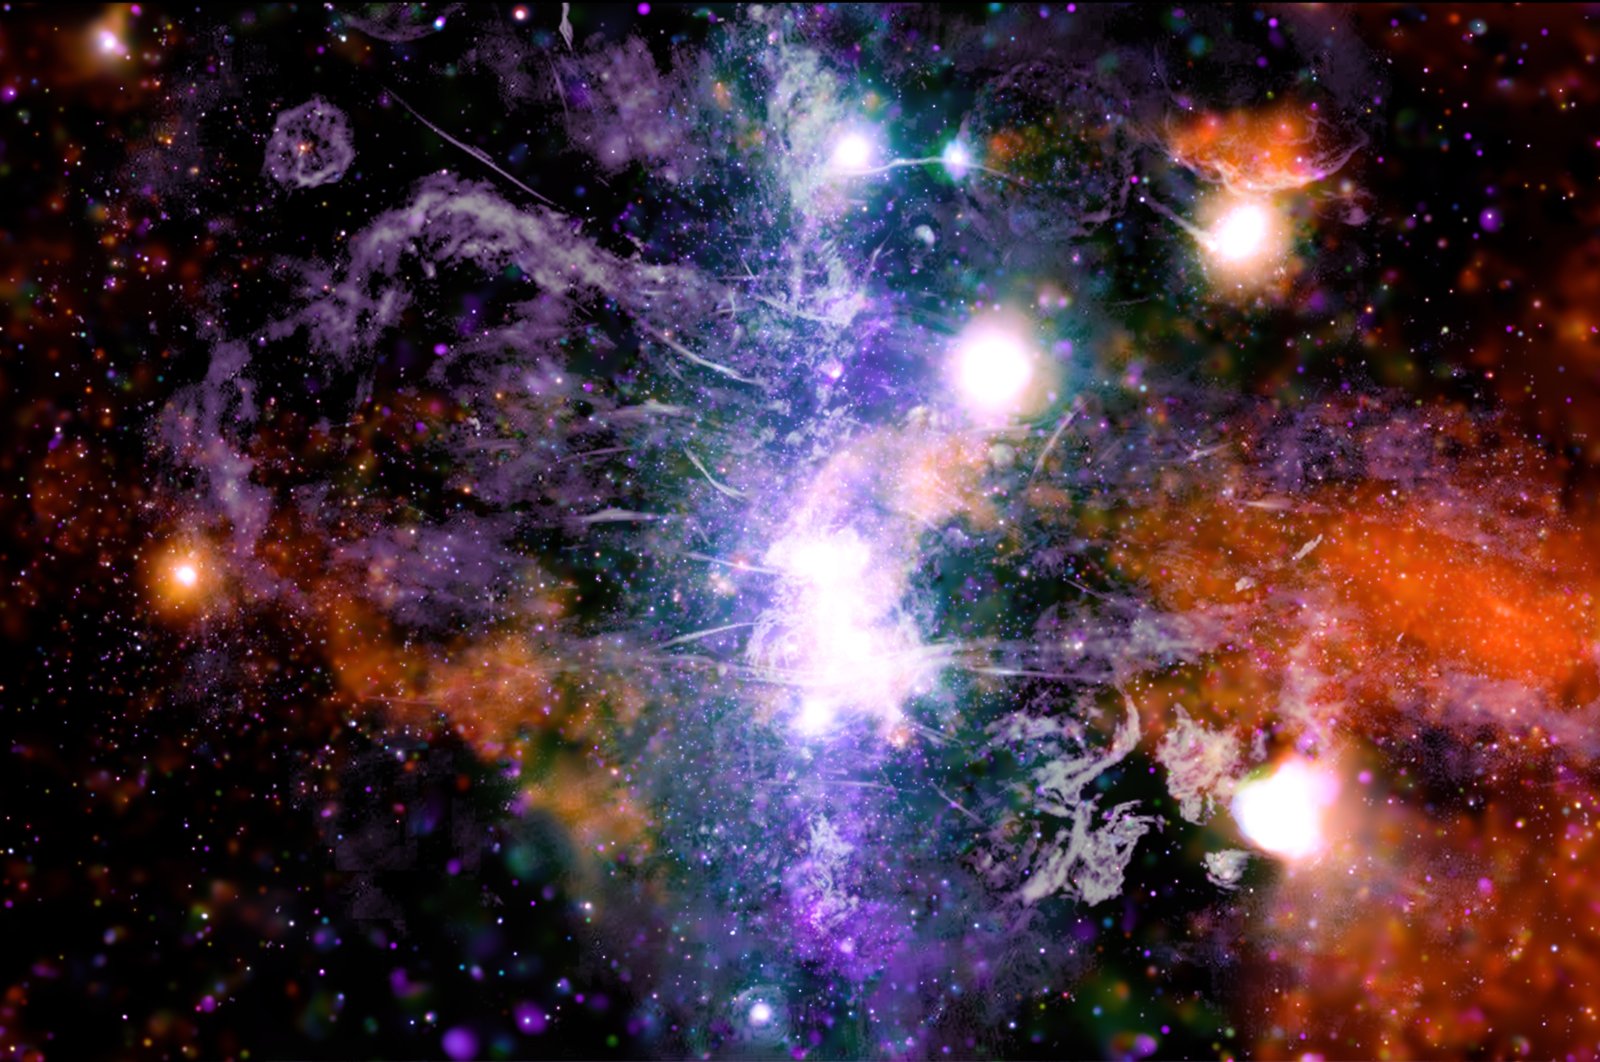 A false-color X-ray and radio frequency composite image shows threads of superheated gas and magnetic fields at the center of the Milky Way galaxy, May 28, 2021. (NASA via EPA)